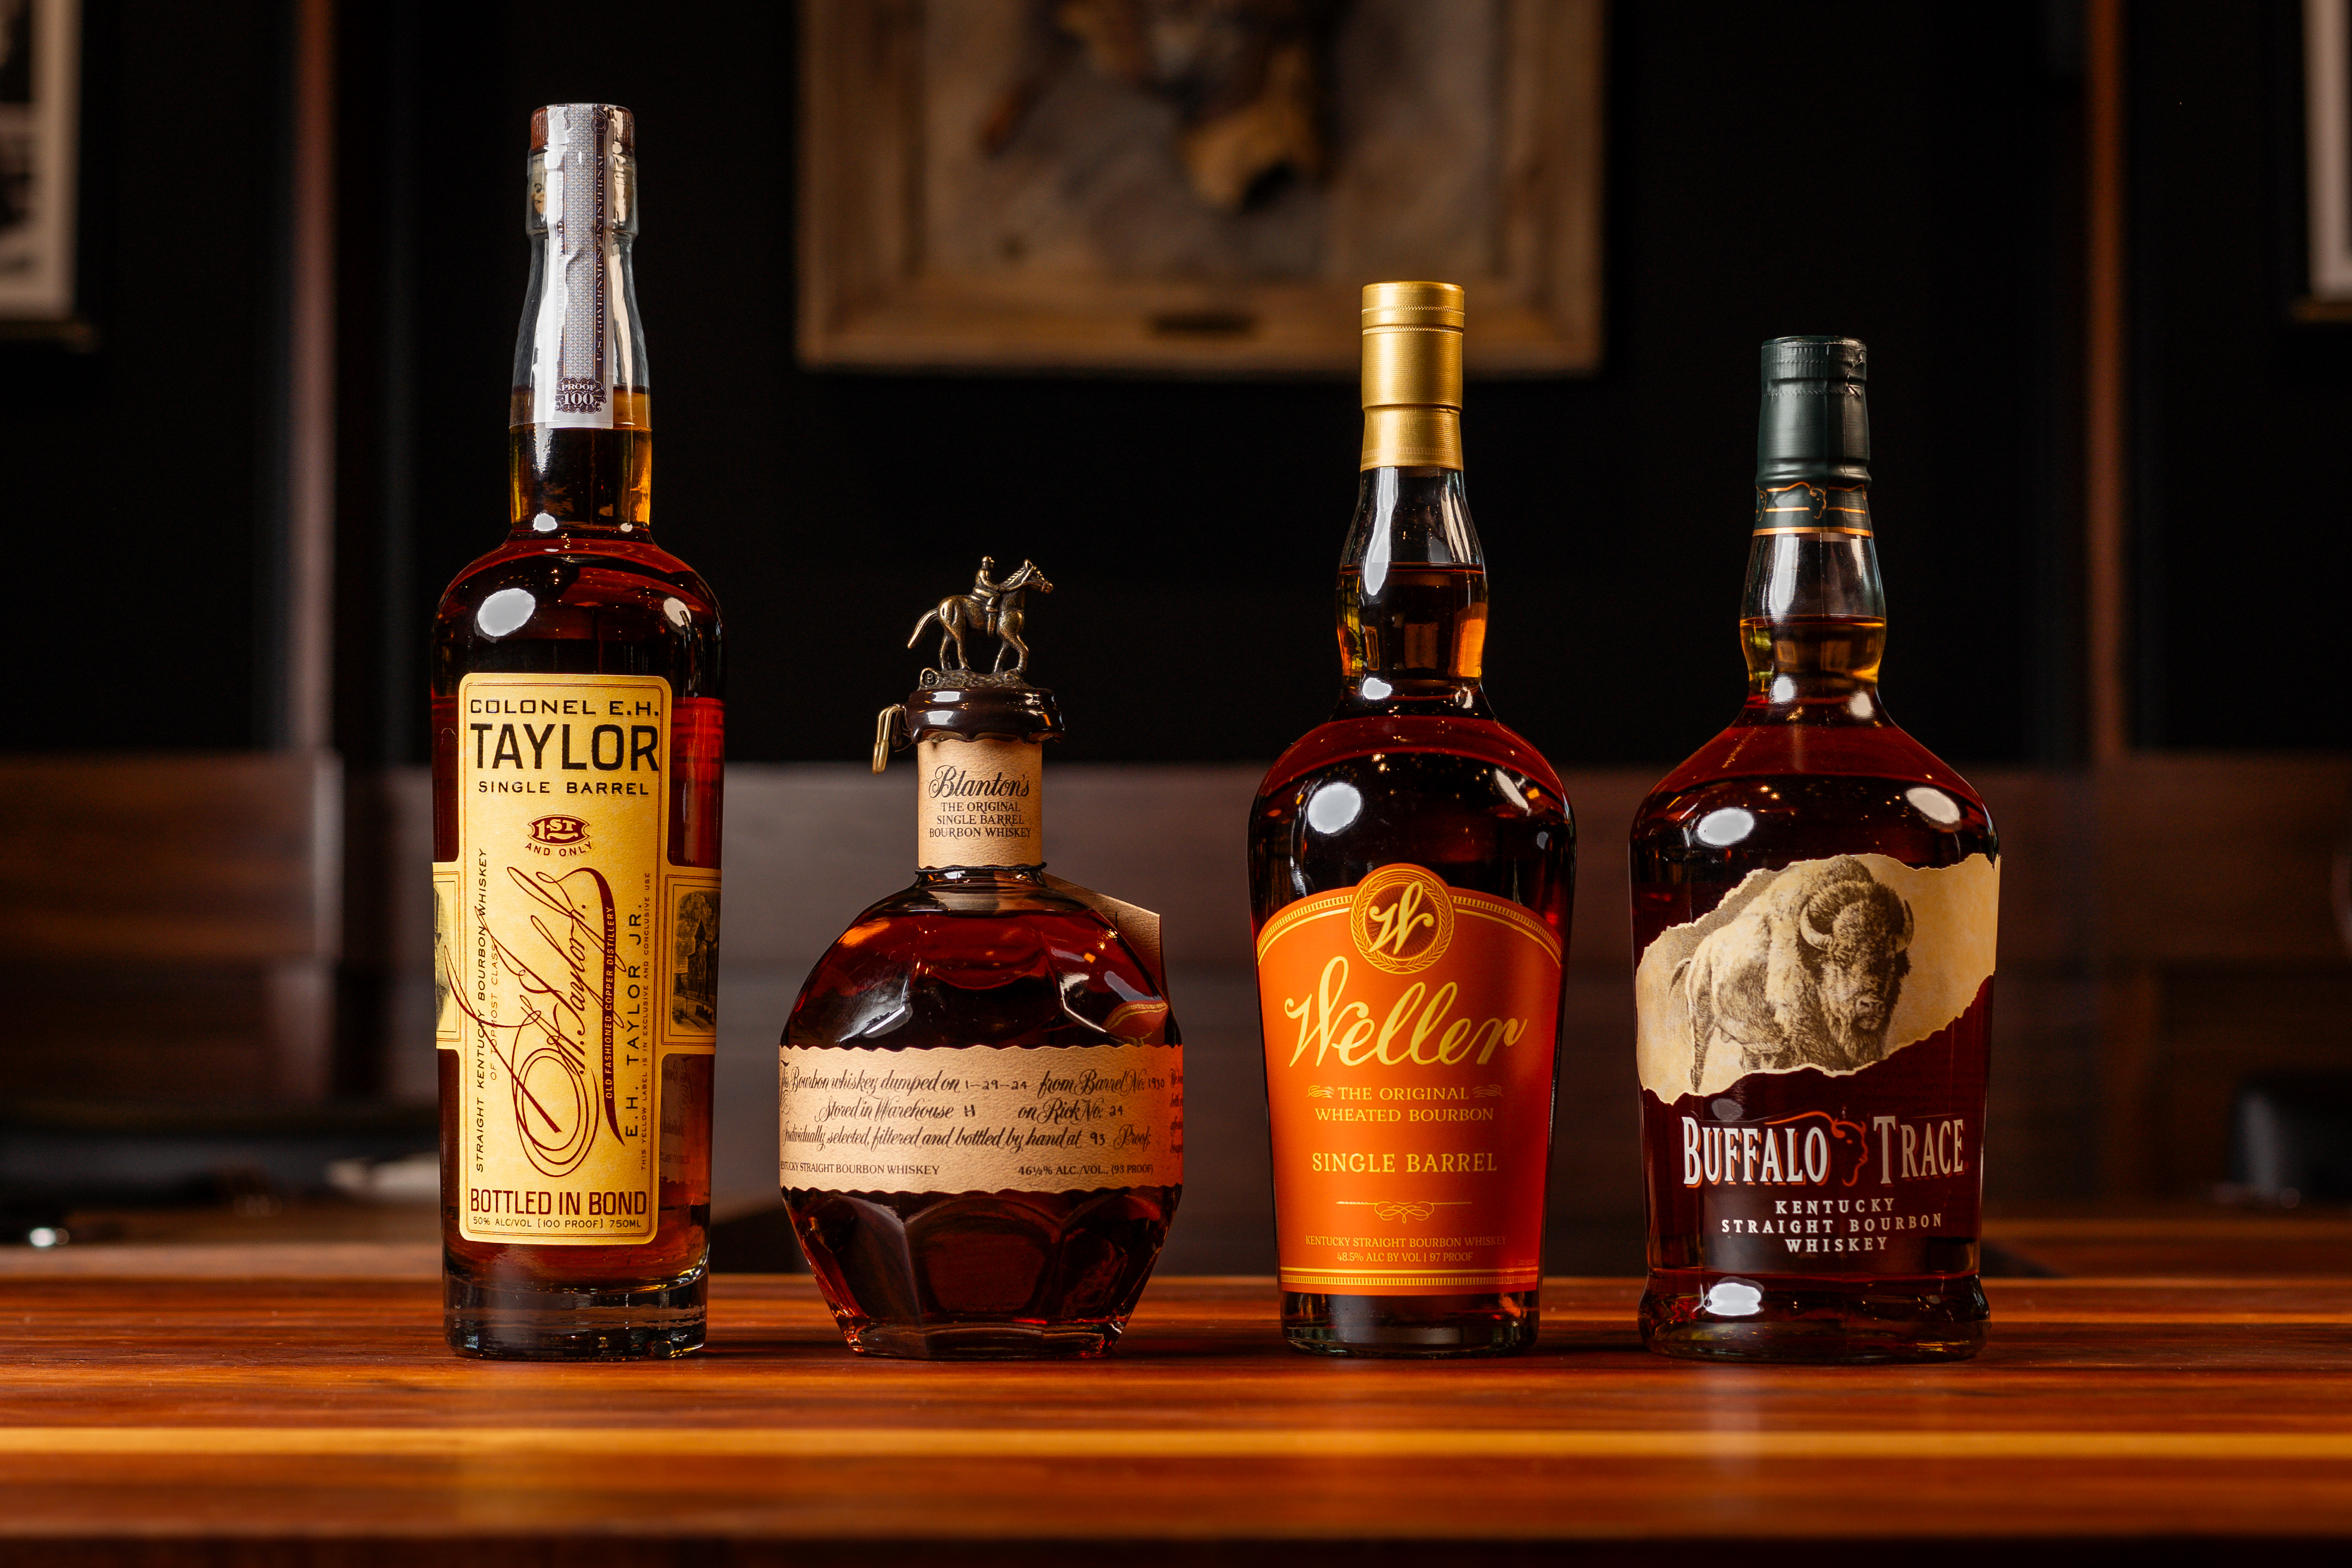 Join us in THE RANCH Saloon for a Bourbon Dinner Buffalo Trace.